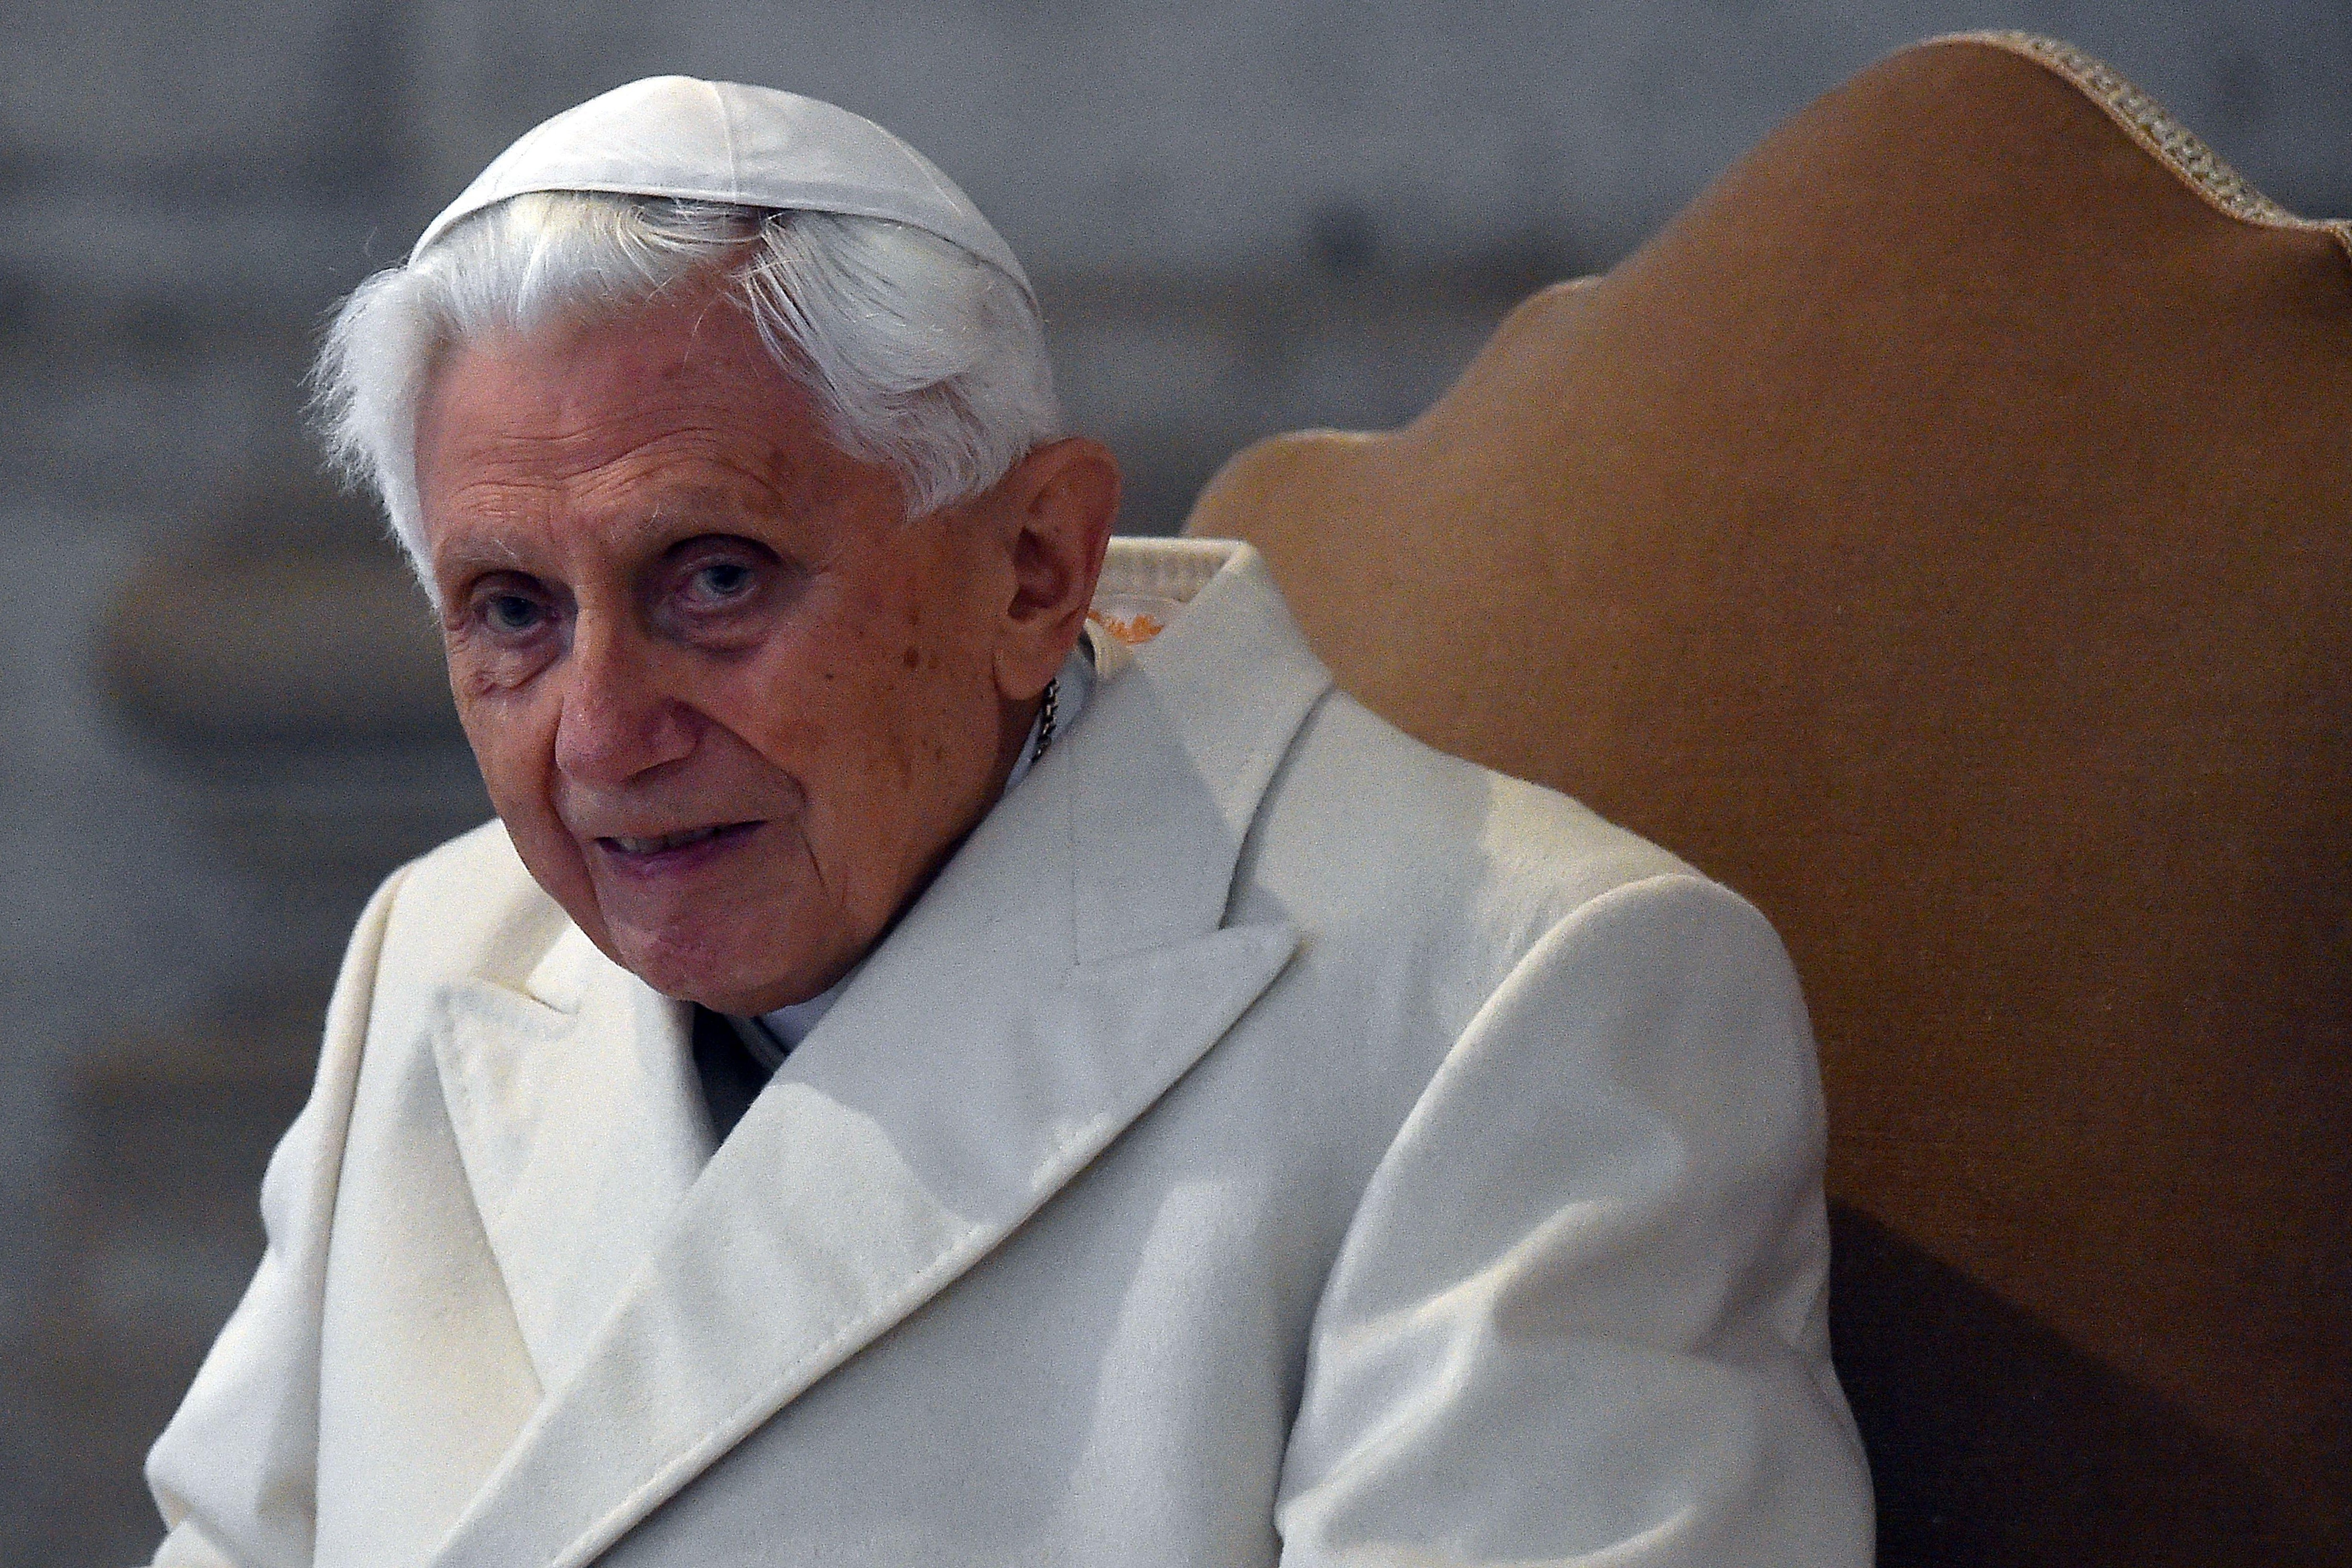 Pope Benedict seated in a white cap and white coat.